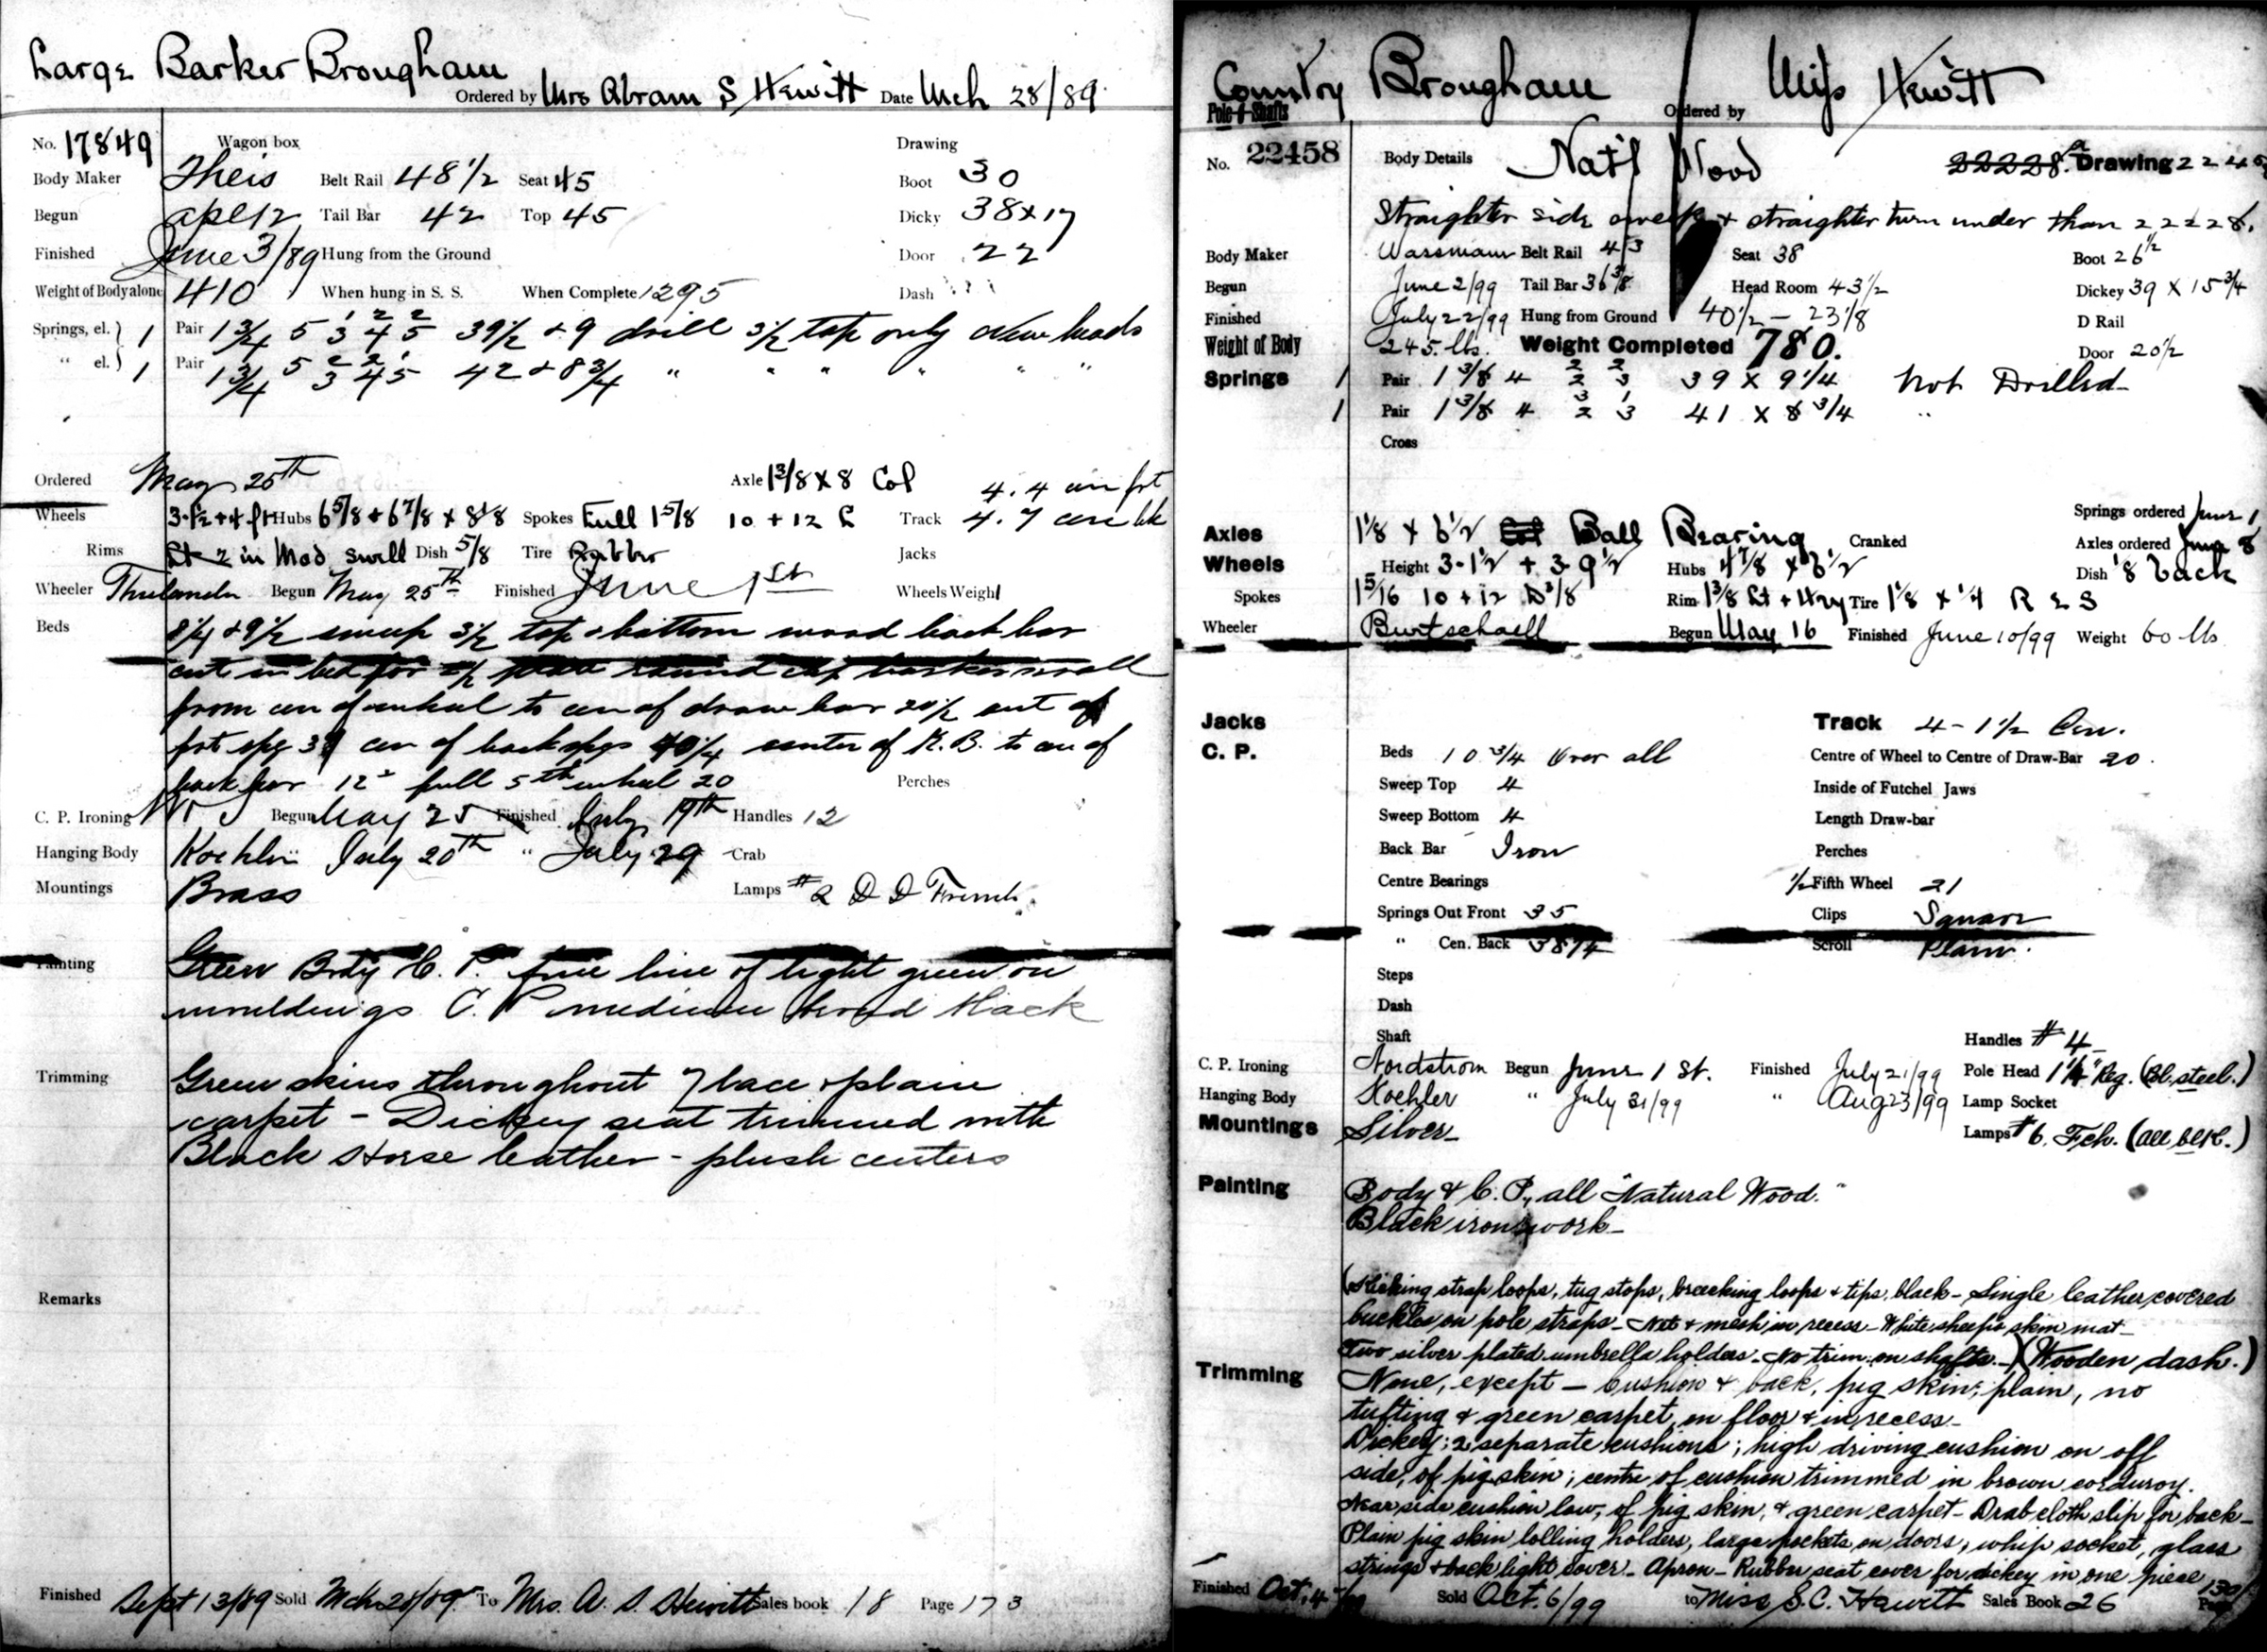 Brewster Carriage Company records showing orders for carriages that Sarah Hewitt purchased in 1889 and 1899. Images courtesy of the New York Public Library.